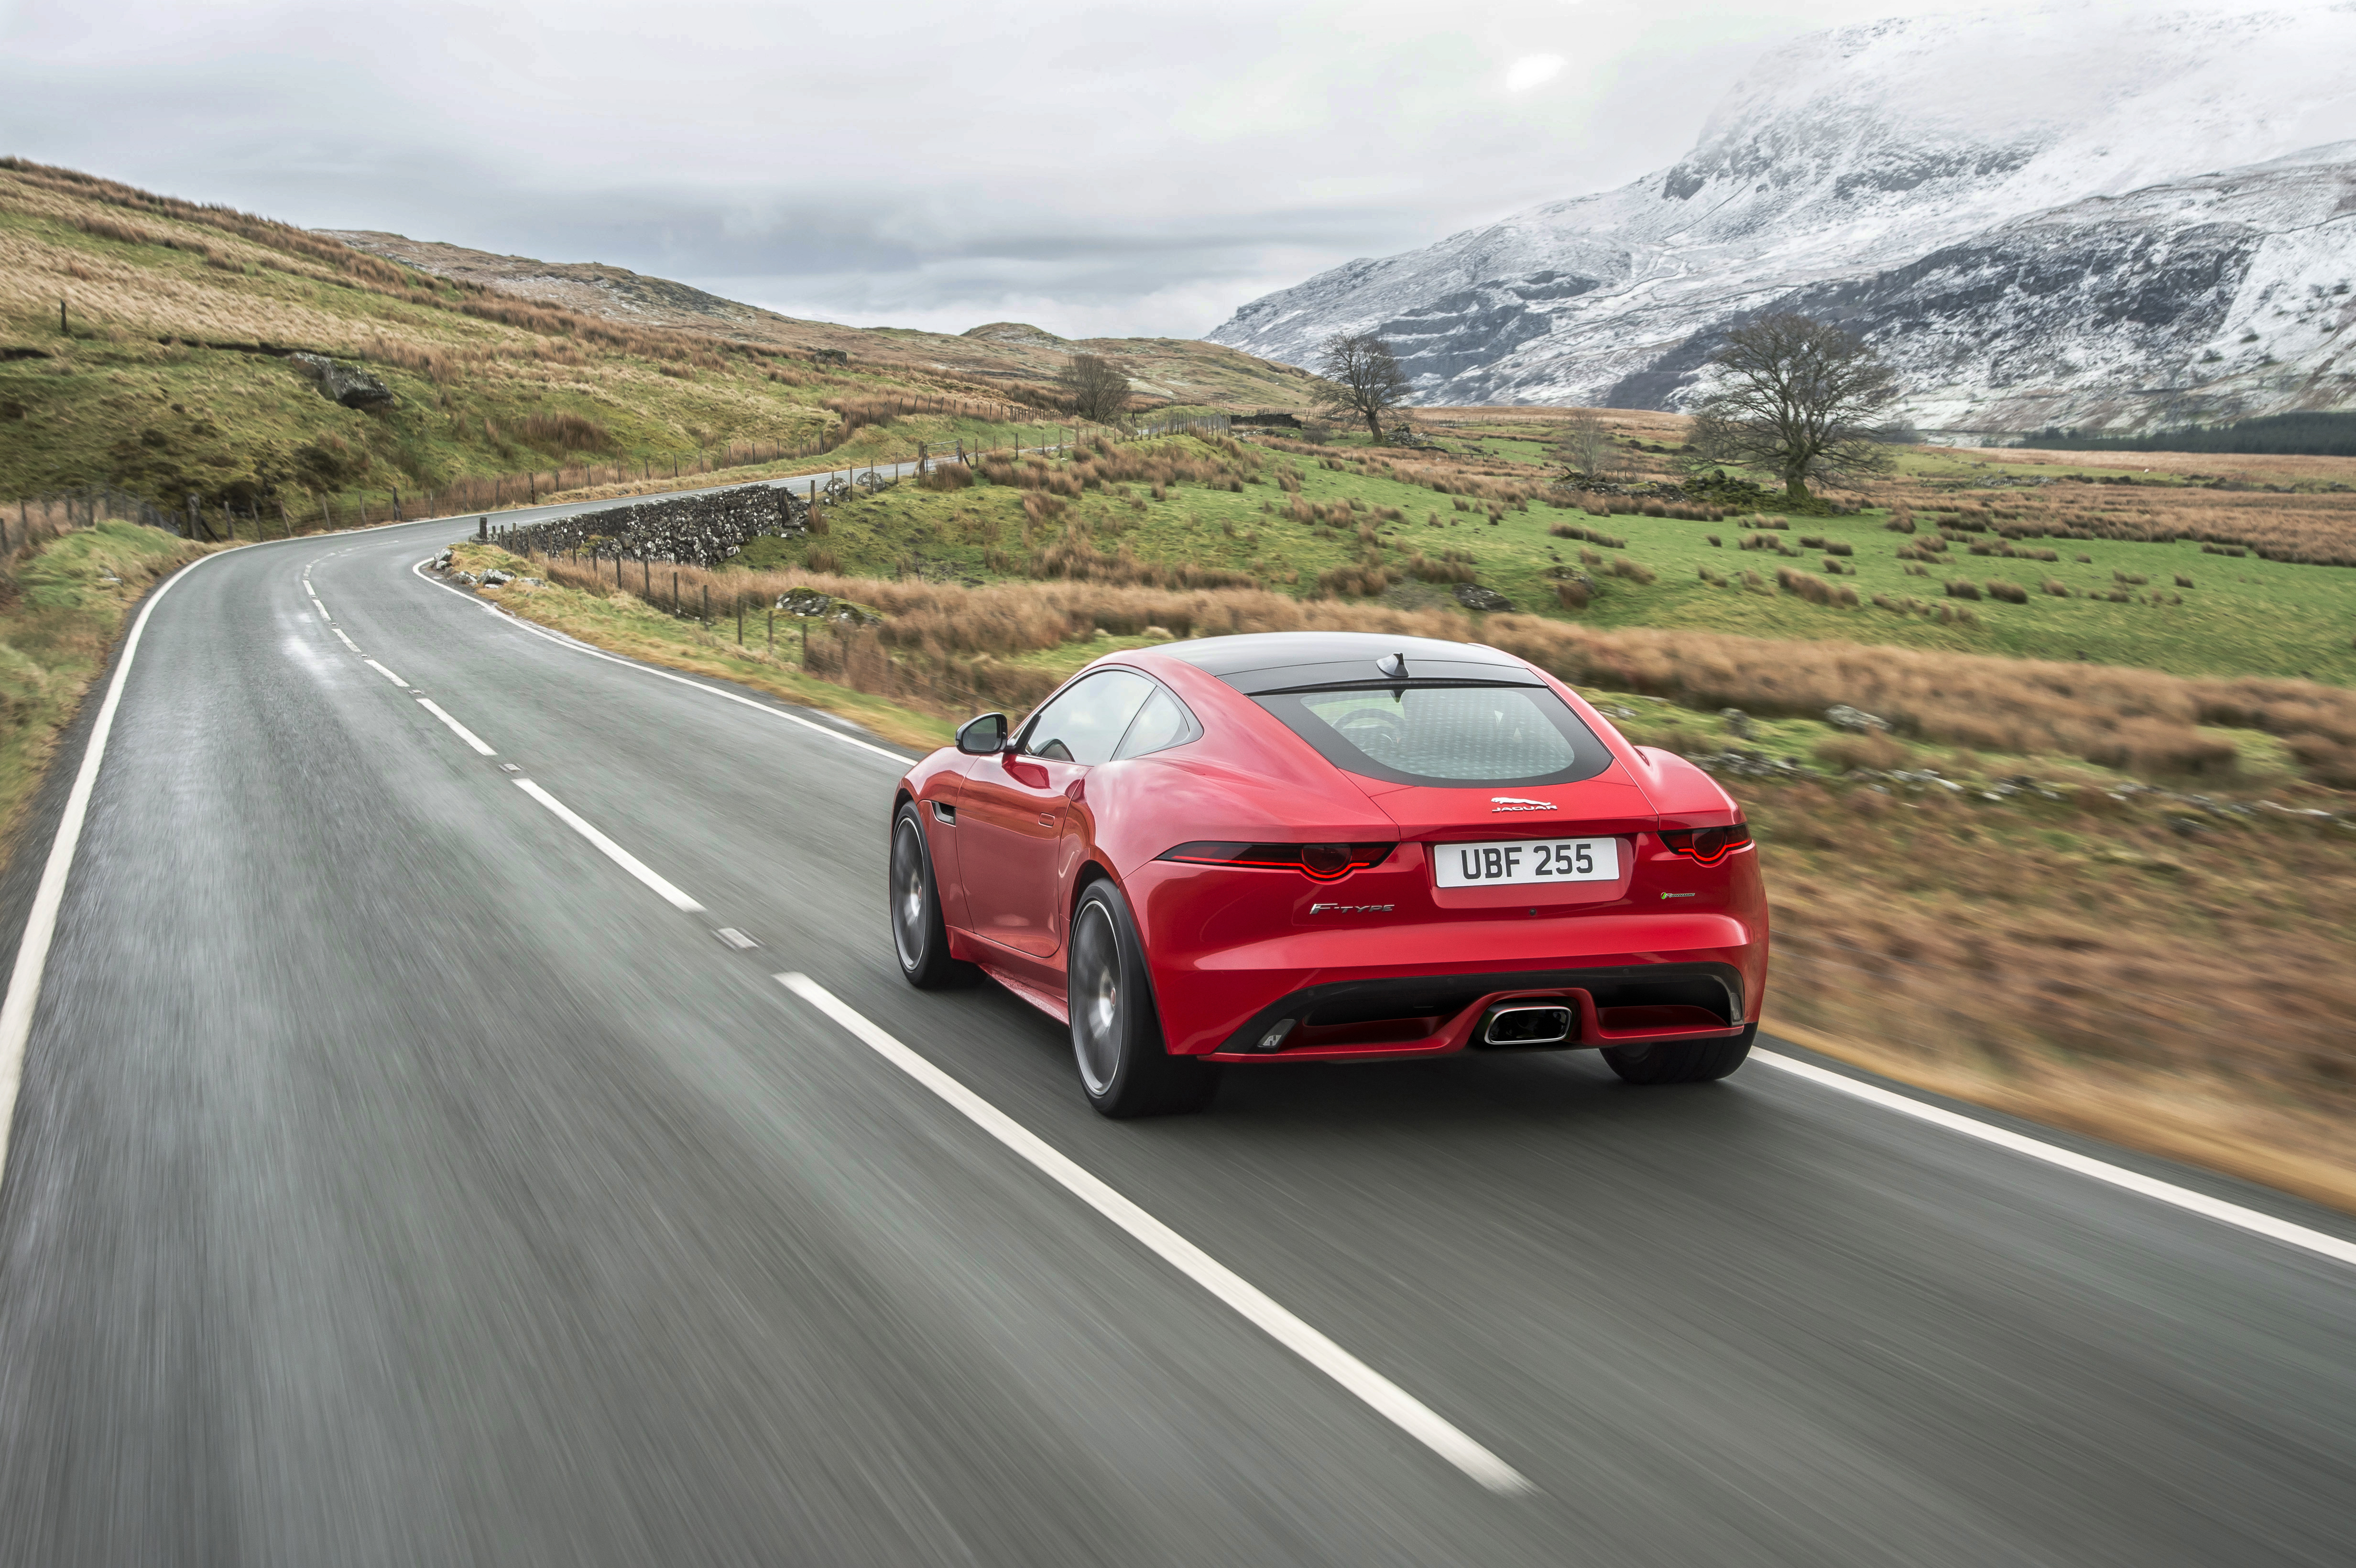 Jaguar F-Type Convertible accessories specifications